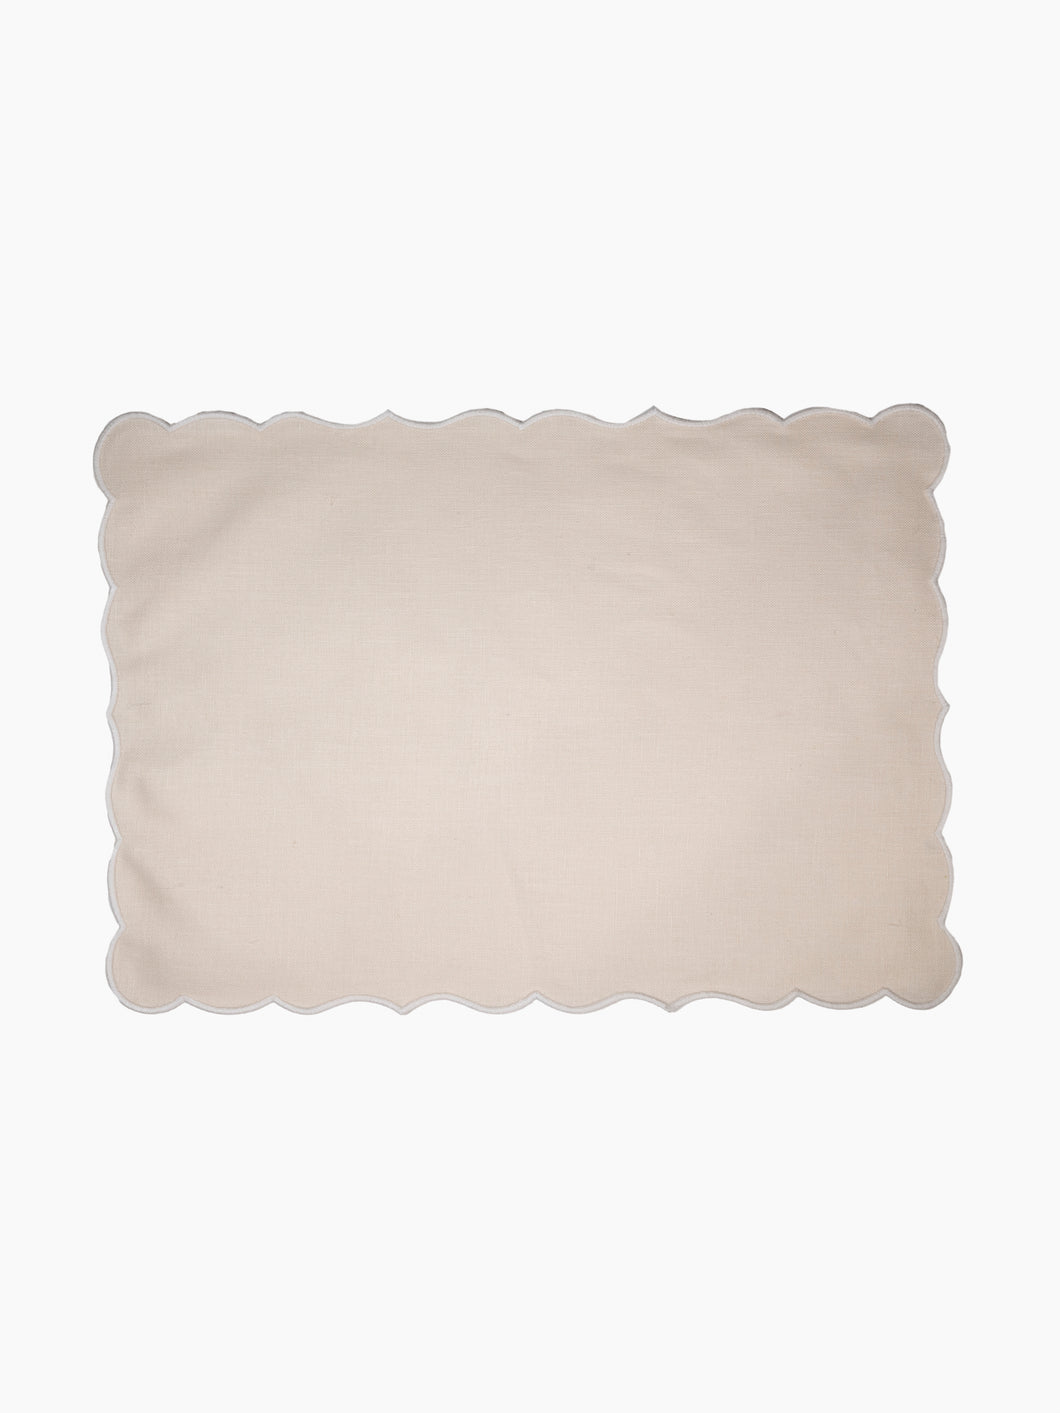 Lido Coated Placemat in Ivory/White